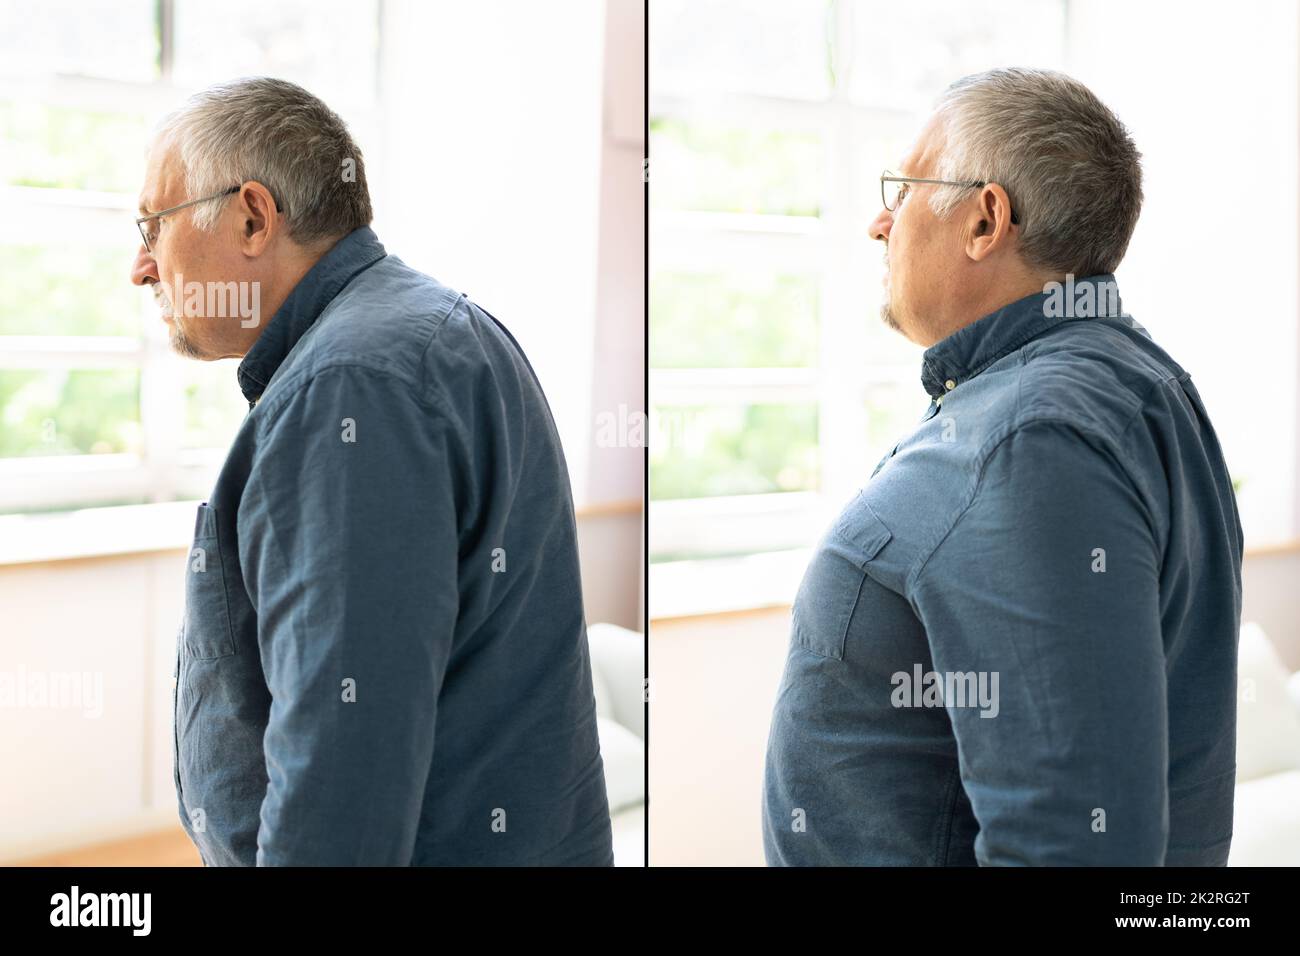 Man With Lordosis And Normal Curvature Stock Photo